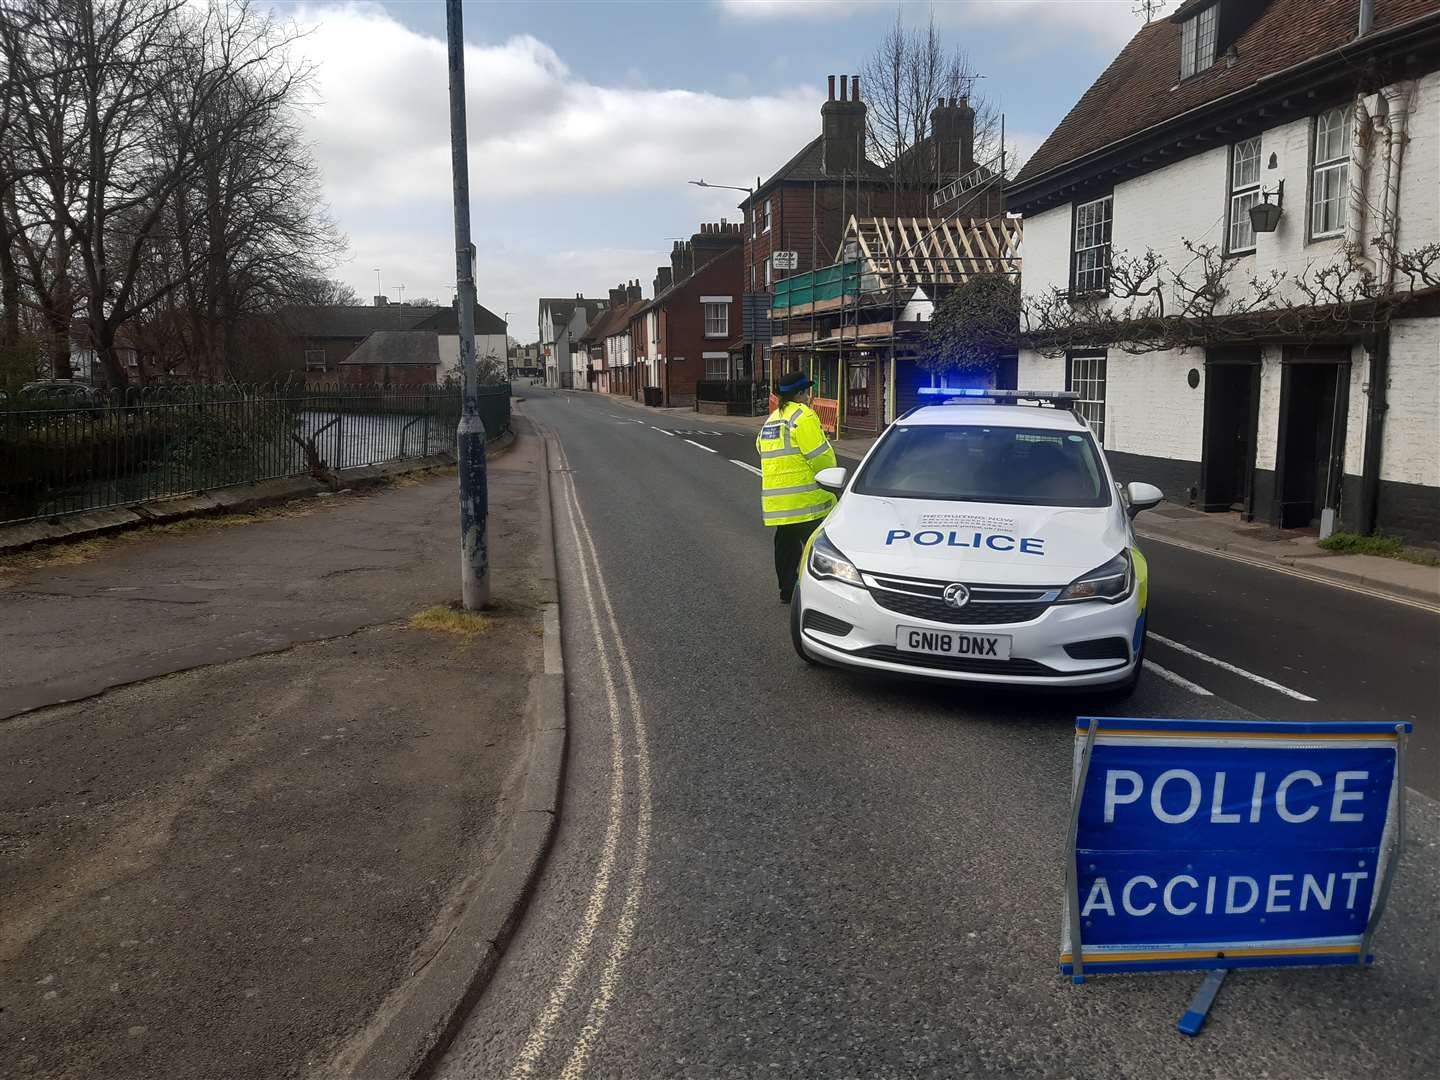 Police have put a roadblock in place at North Lane